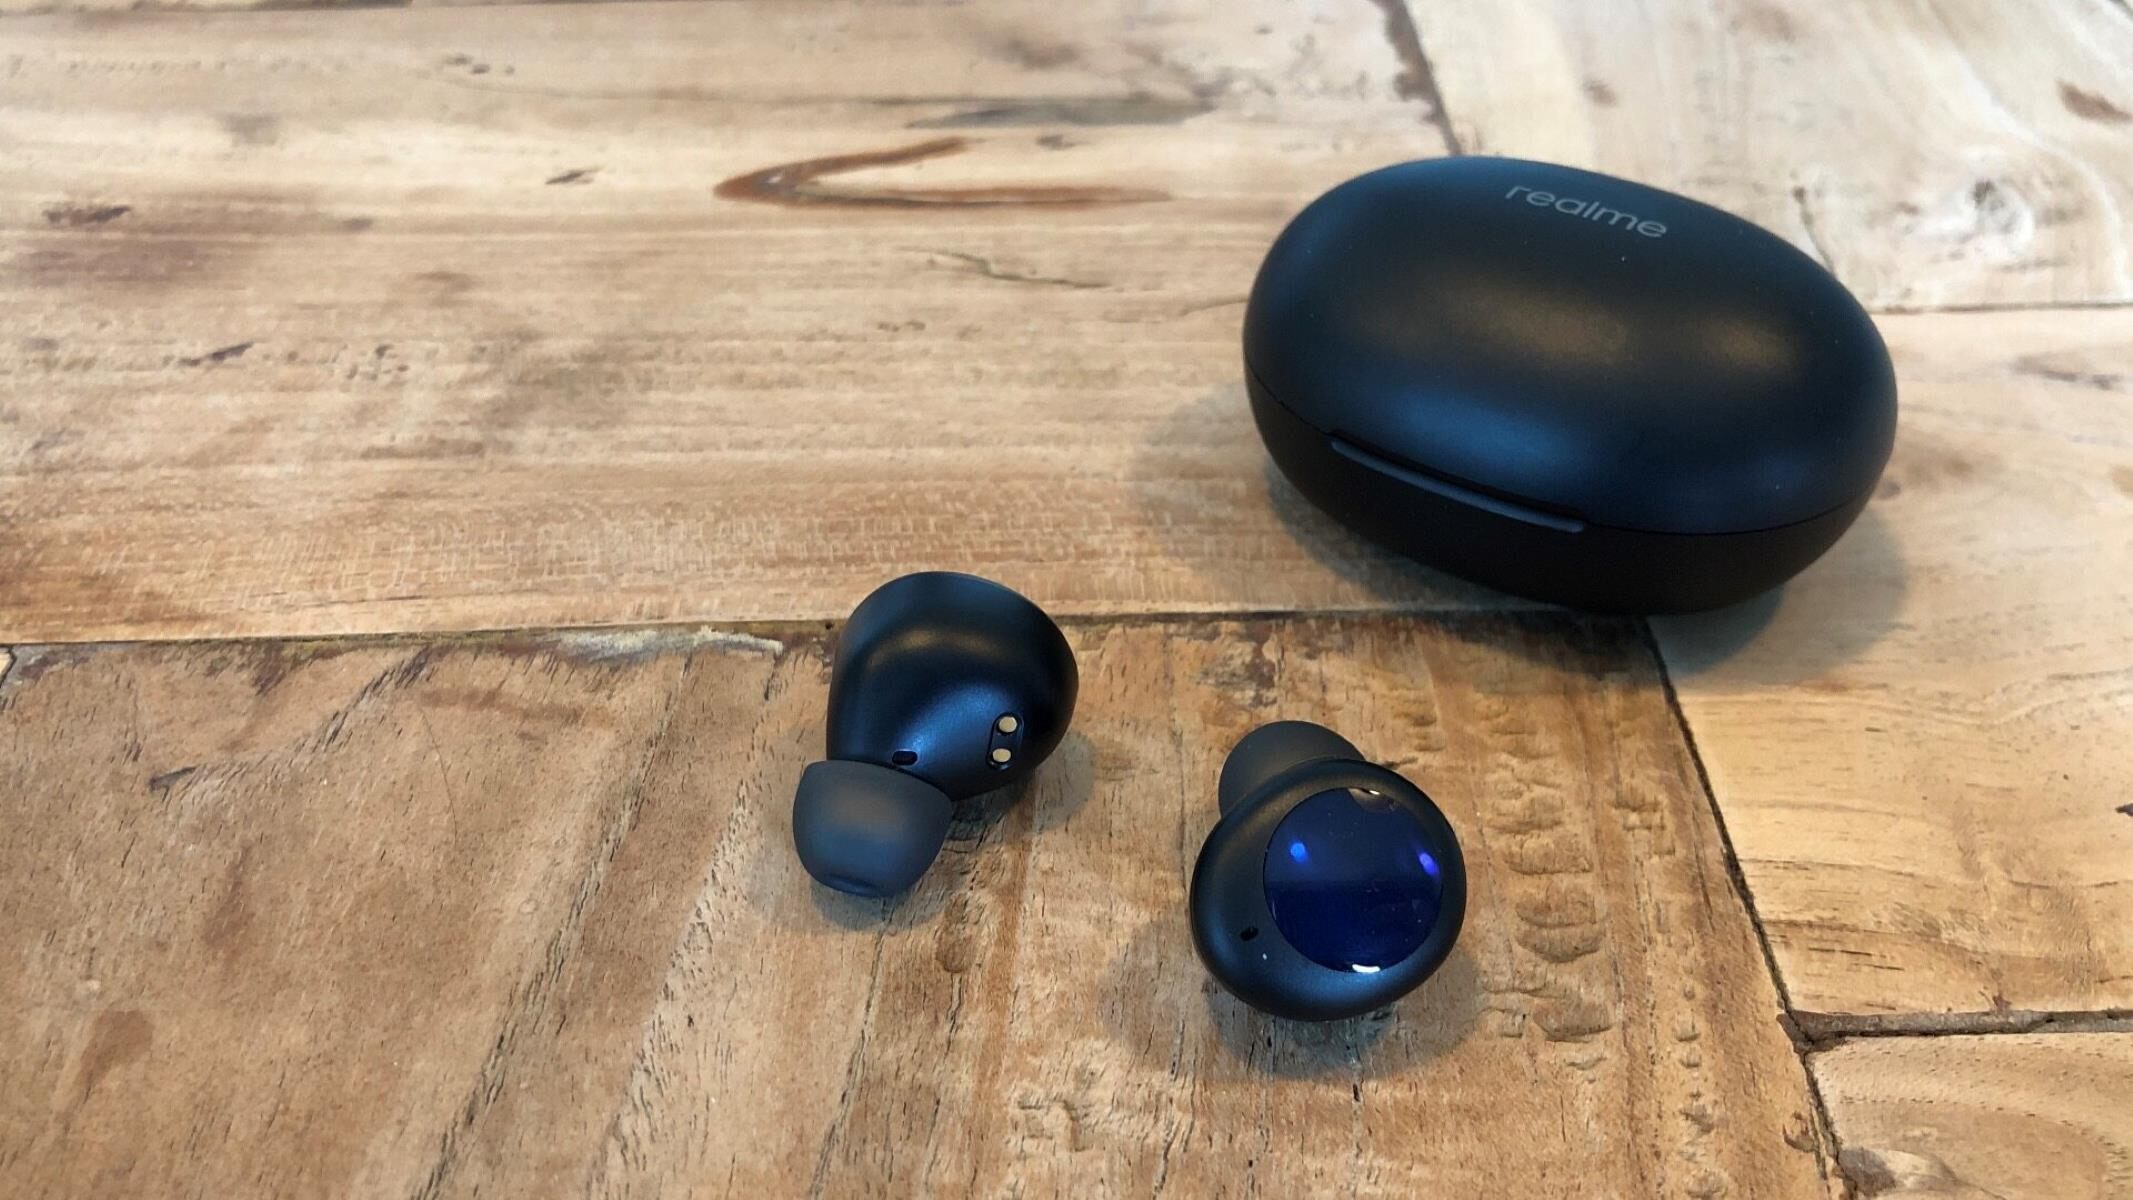 Lost Realme Earbuds? Here’s How To Track And Find Them